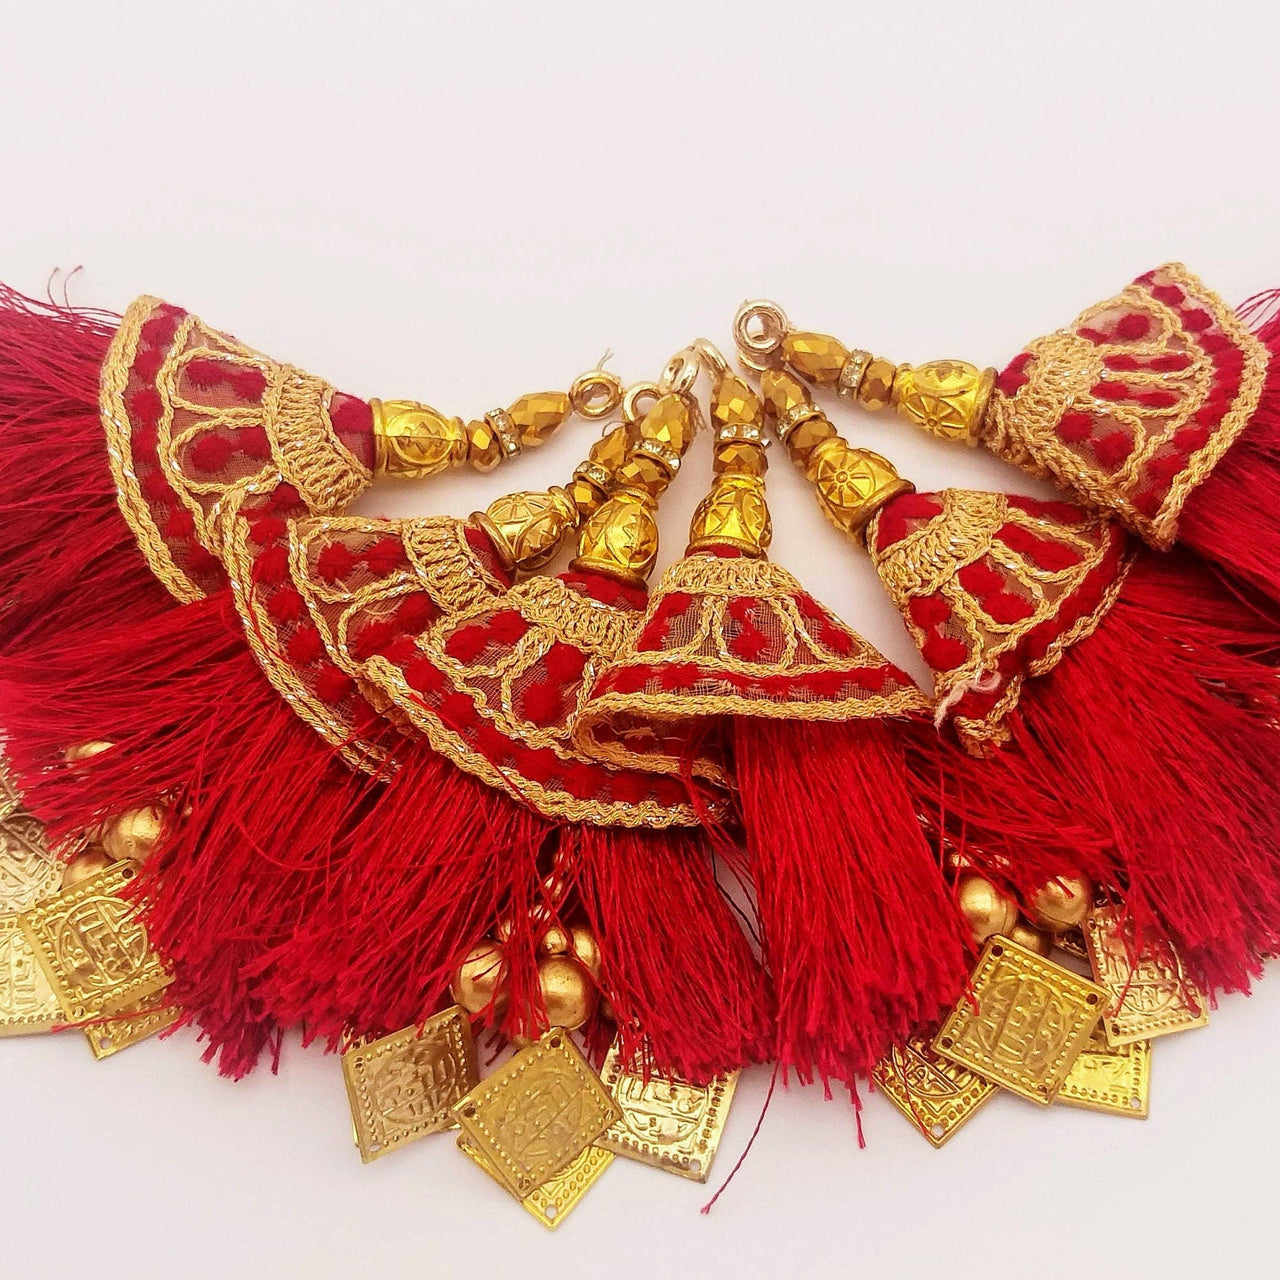 Maroon Tassels With Gold Beads, Beaded Tassels With Maroon and Gold Embroidery, Traditional Indian Latkan